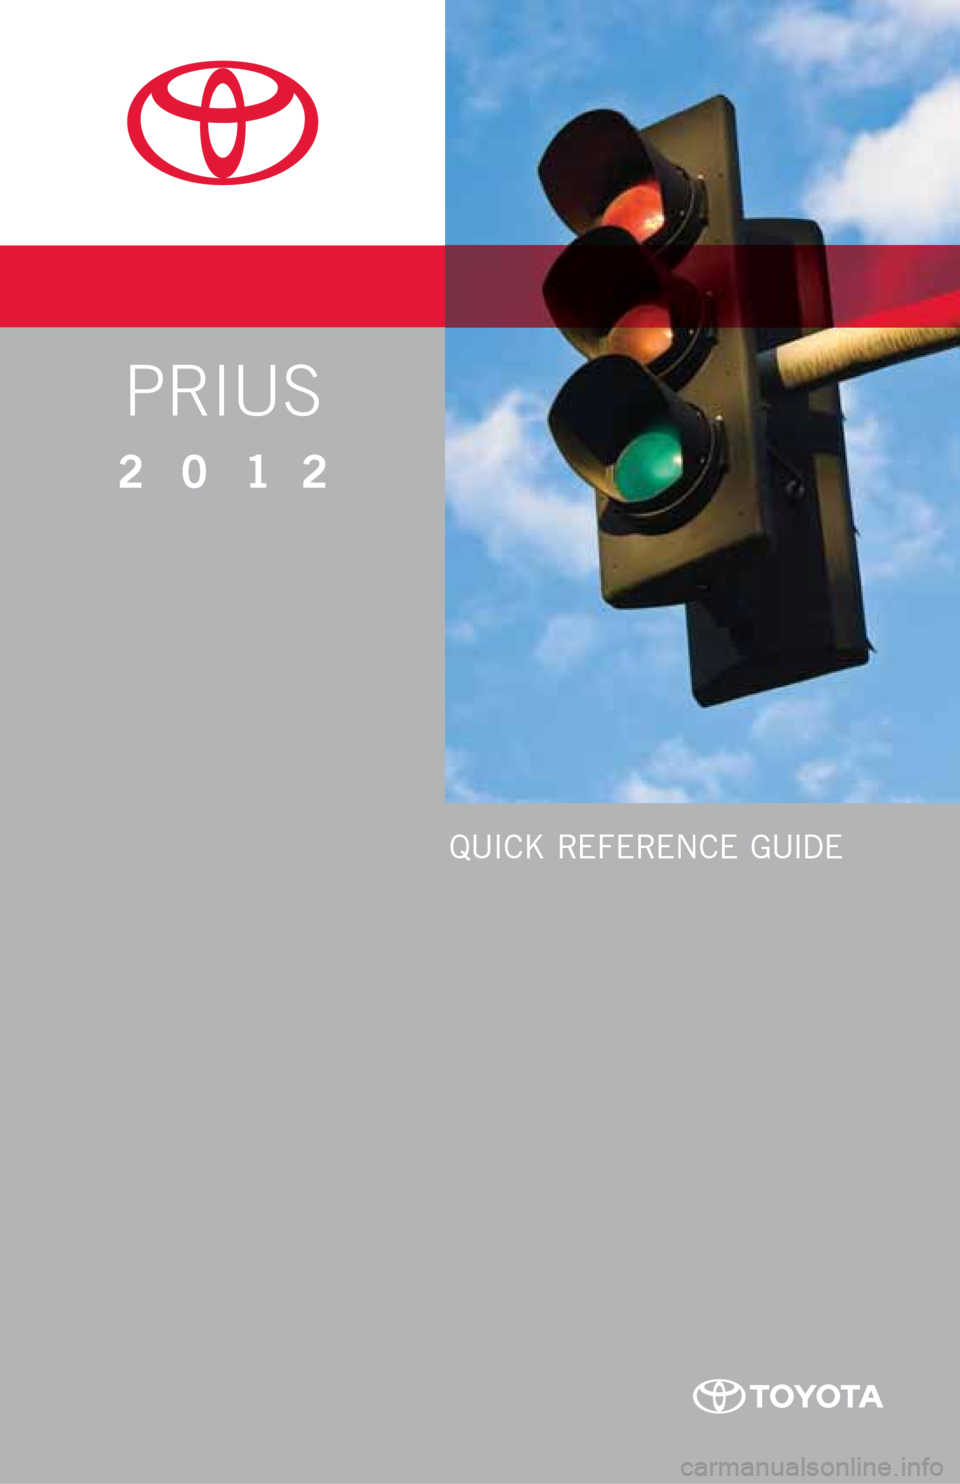 TOYOTA PRIUS 2012 3.G Quick Reference Guide QUICK REFERENCE GUIDE
PRIUS
2012 